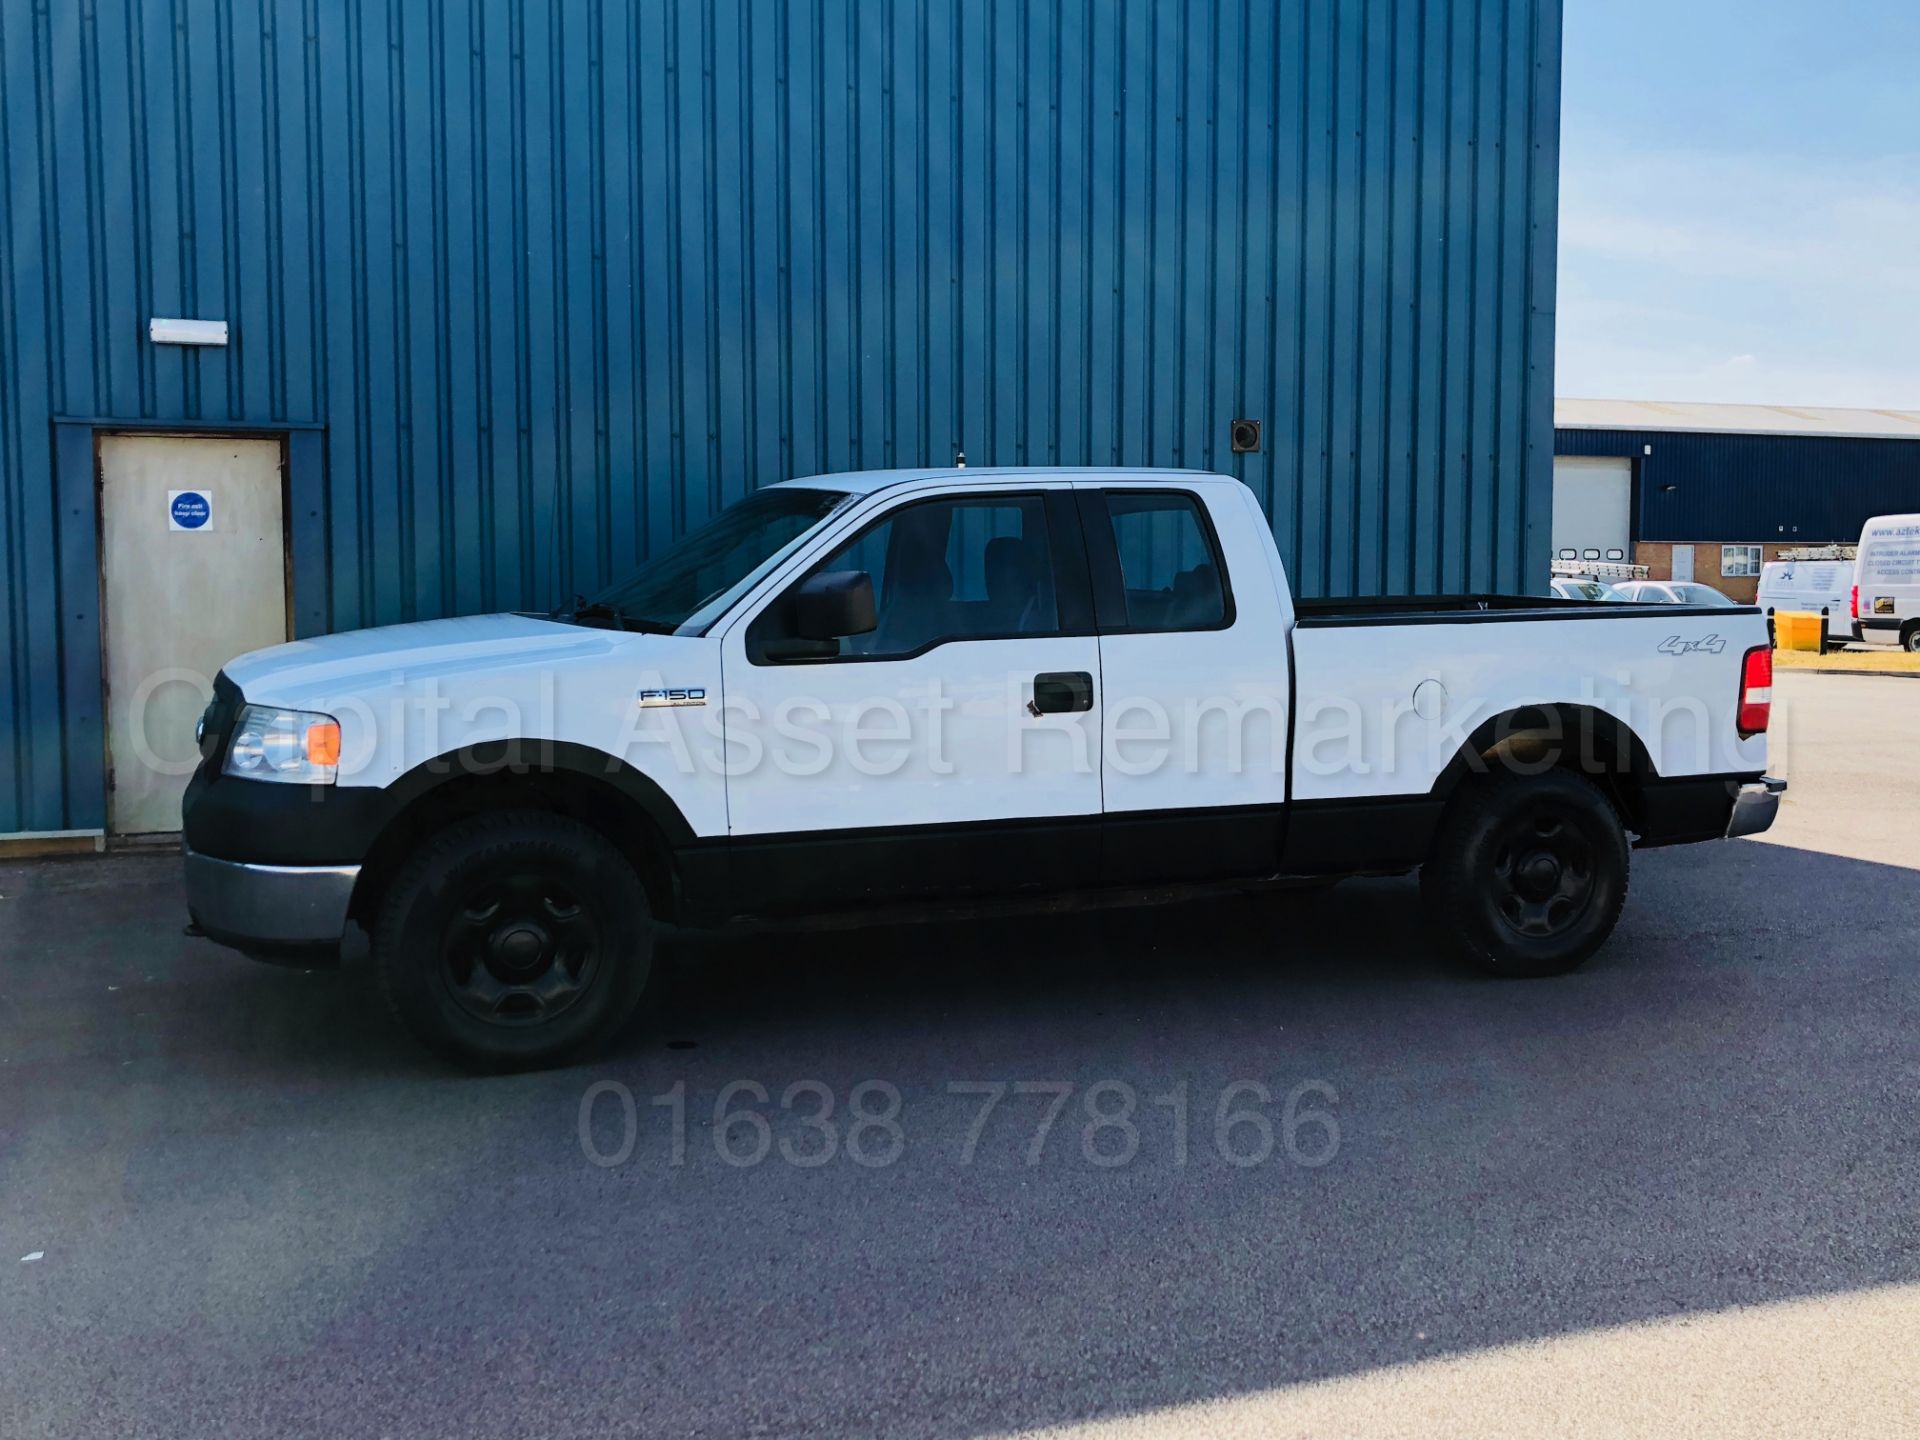 (On Sale) FORD F-150 5.4 TRITON V8 XL EDITION KING-CAB 2008 YEAR**4X4**AUTOMATIC**6 SEATS* - Image 6 of 26